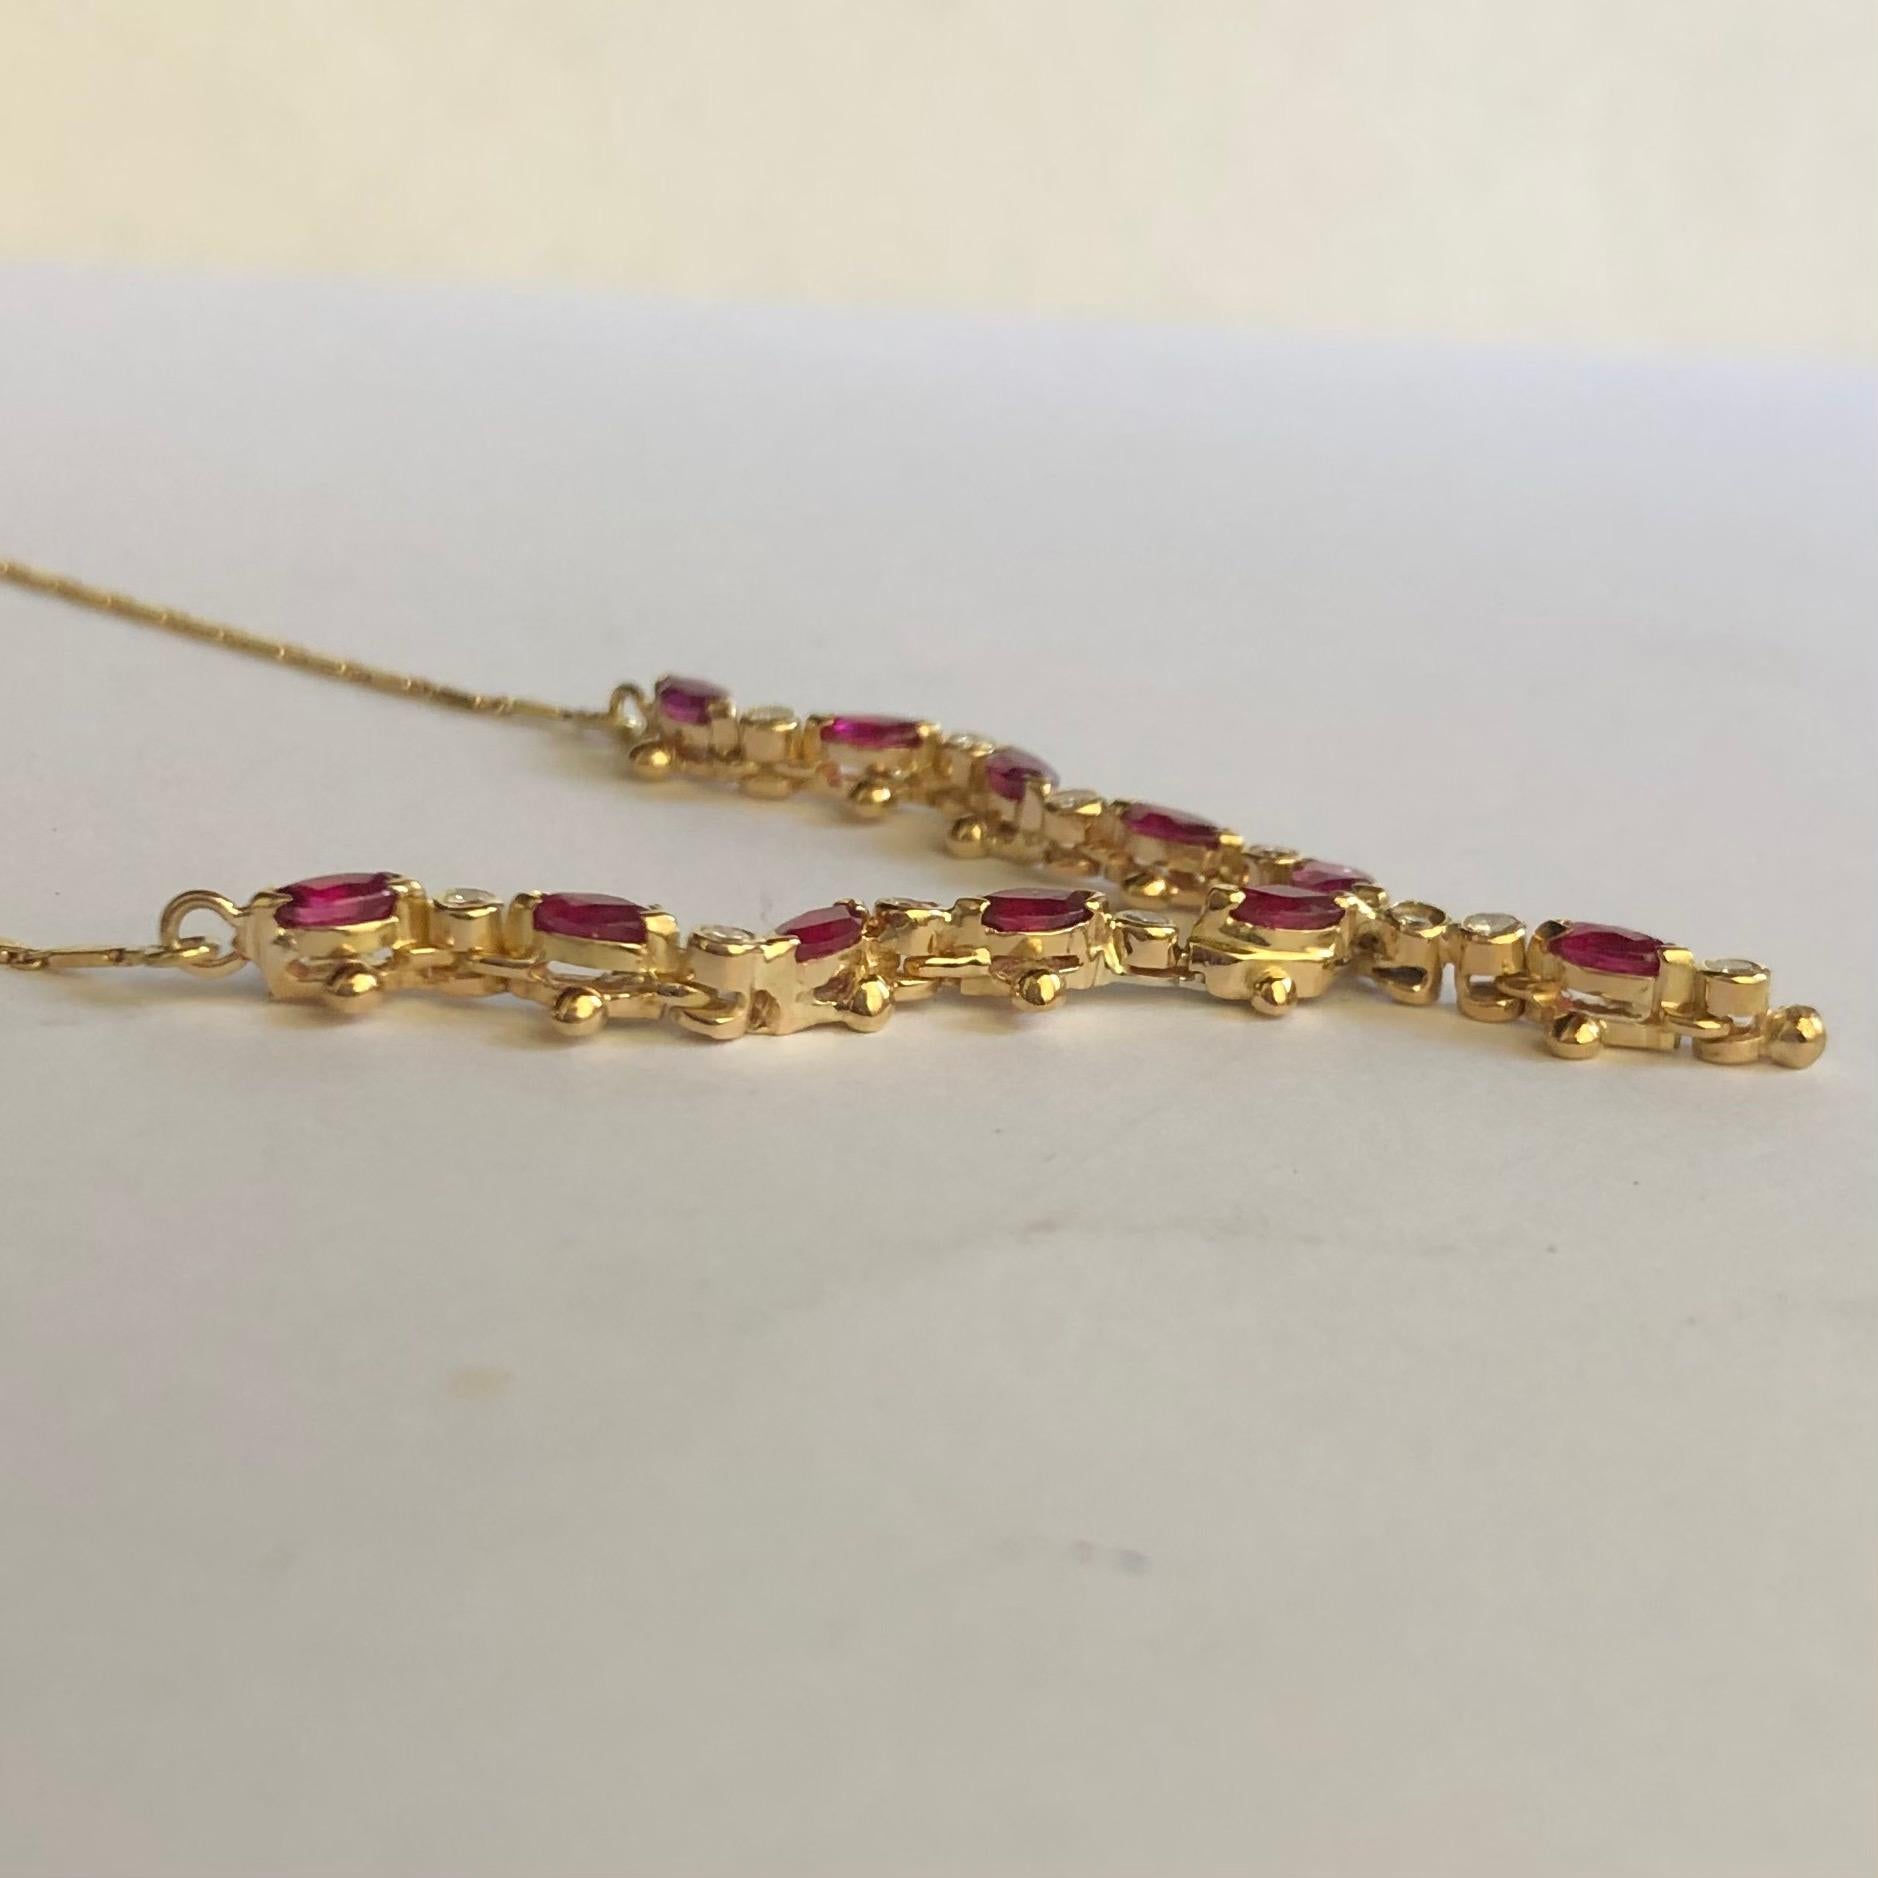 Oval Cut 0.66 Ct Oval Rubies and 0.11 Ct Round Diamonds on a 18k Yellow Gold Necklace